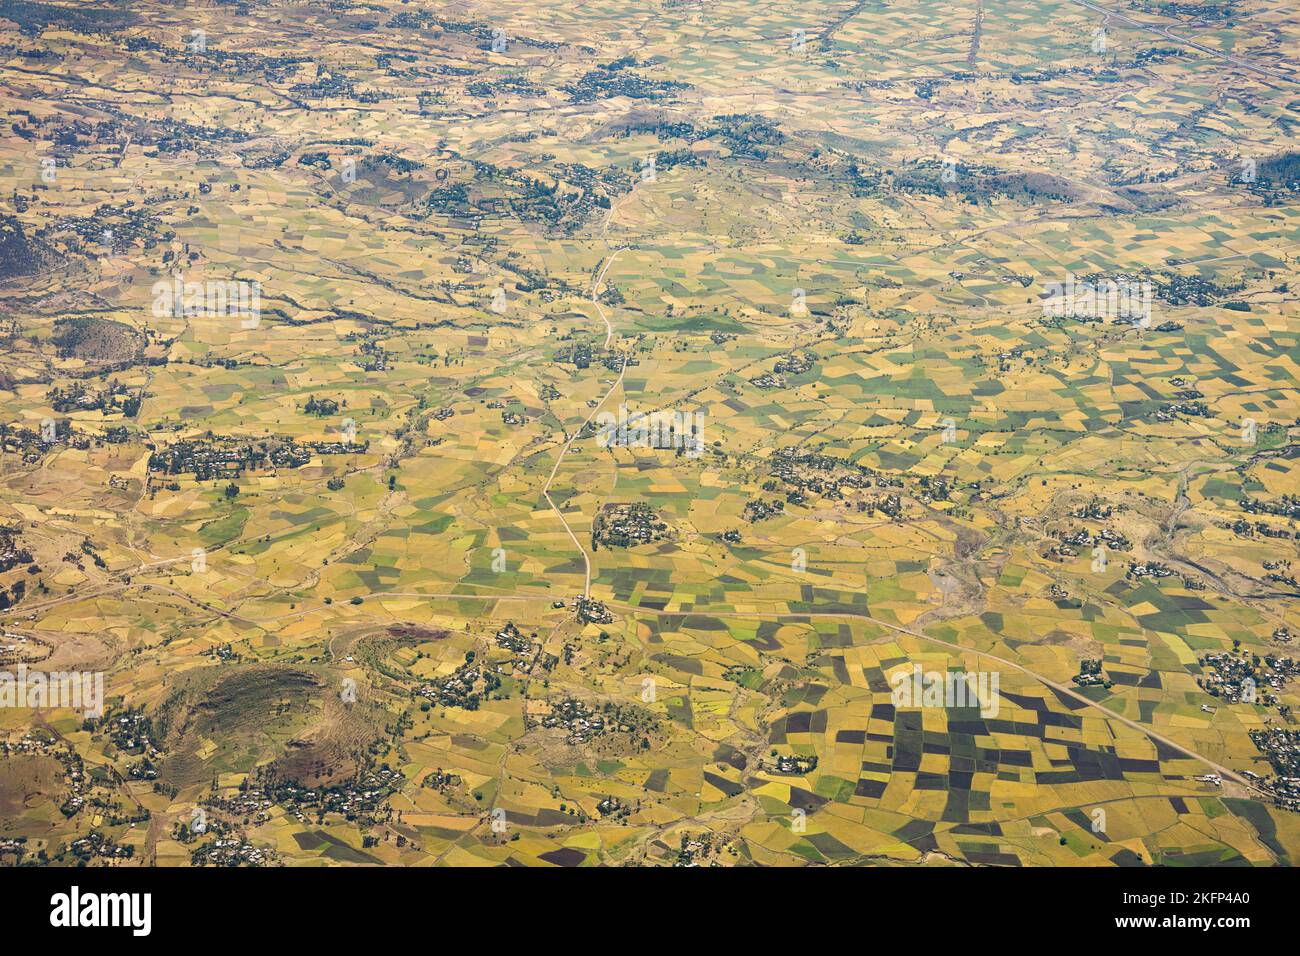 Aerial view of the Ethiopian landscape south of Addis Ababa Stock Photo